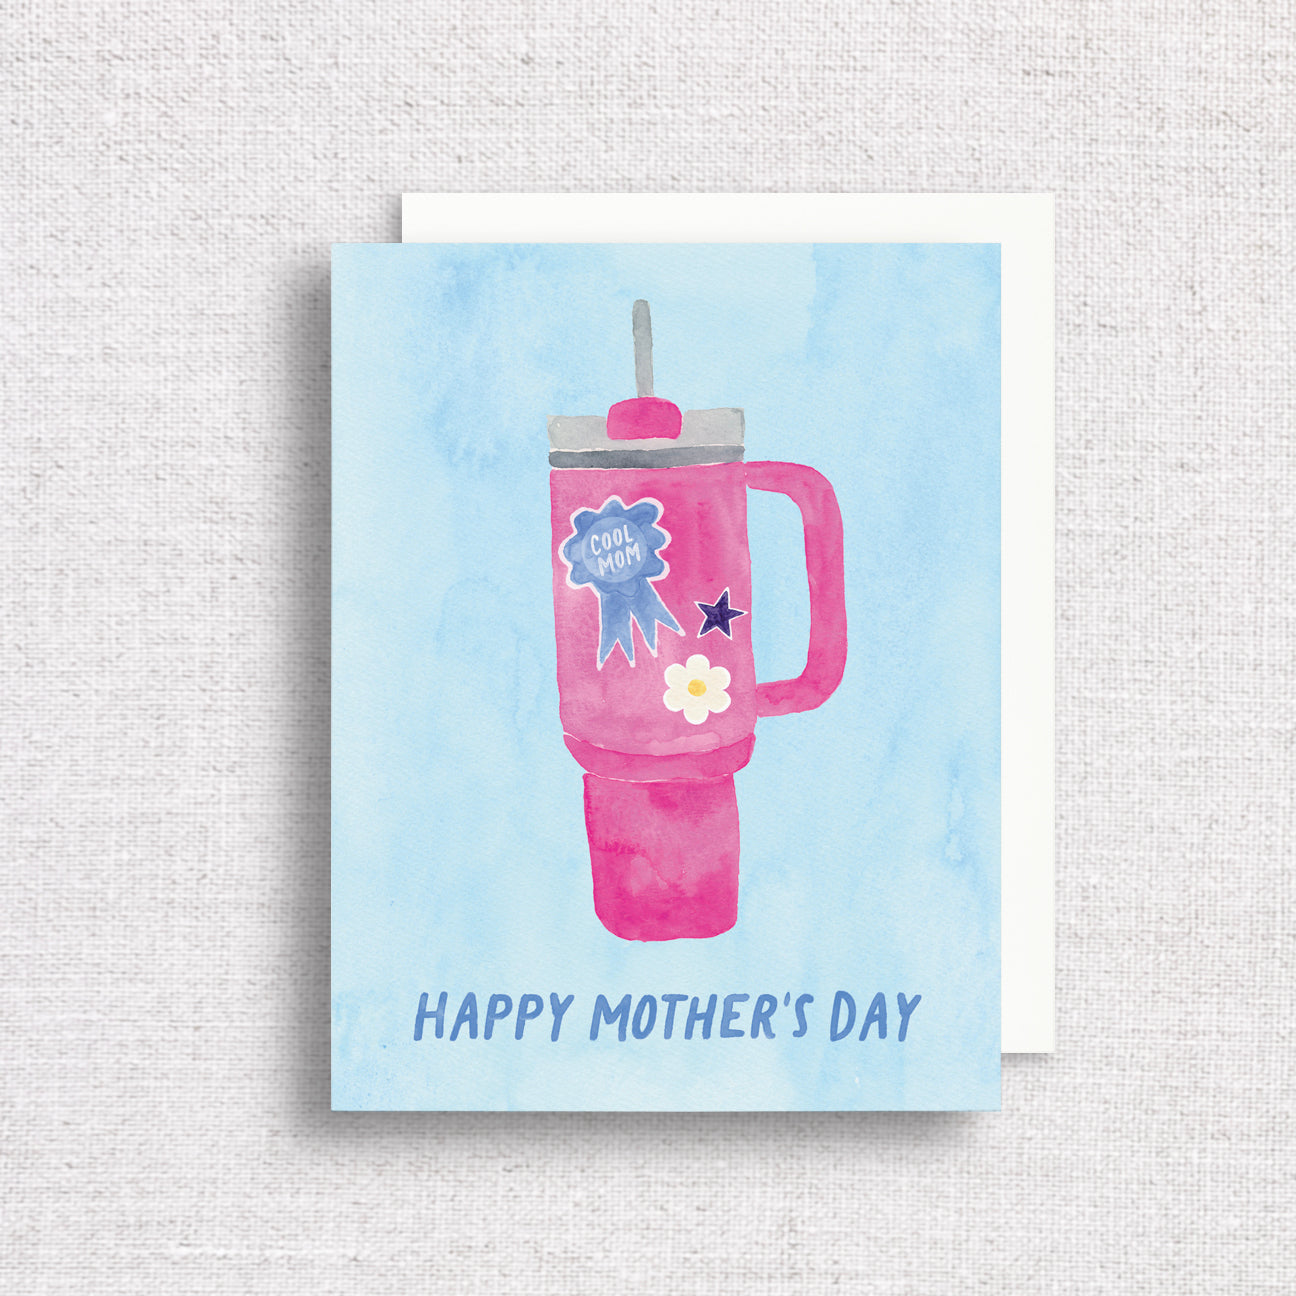 Stanley Cool Mom Mother's Day Greeting Card by Gert & Co